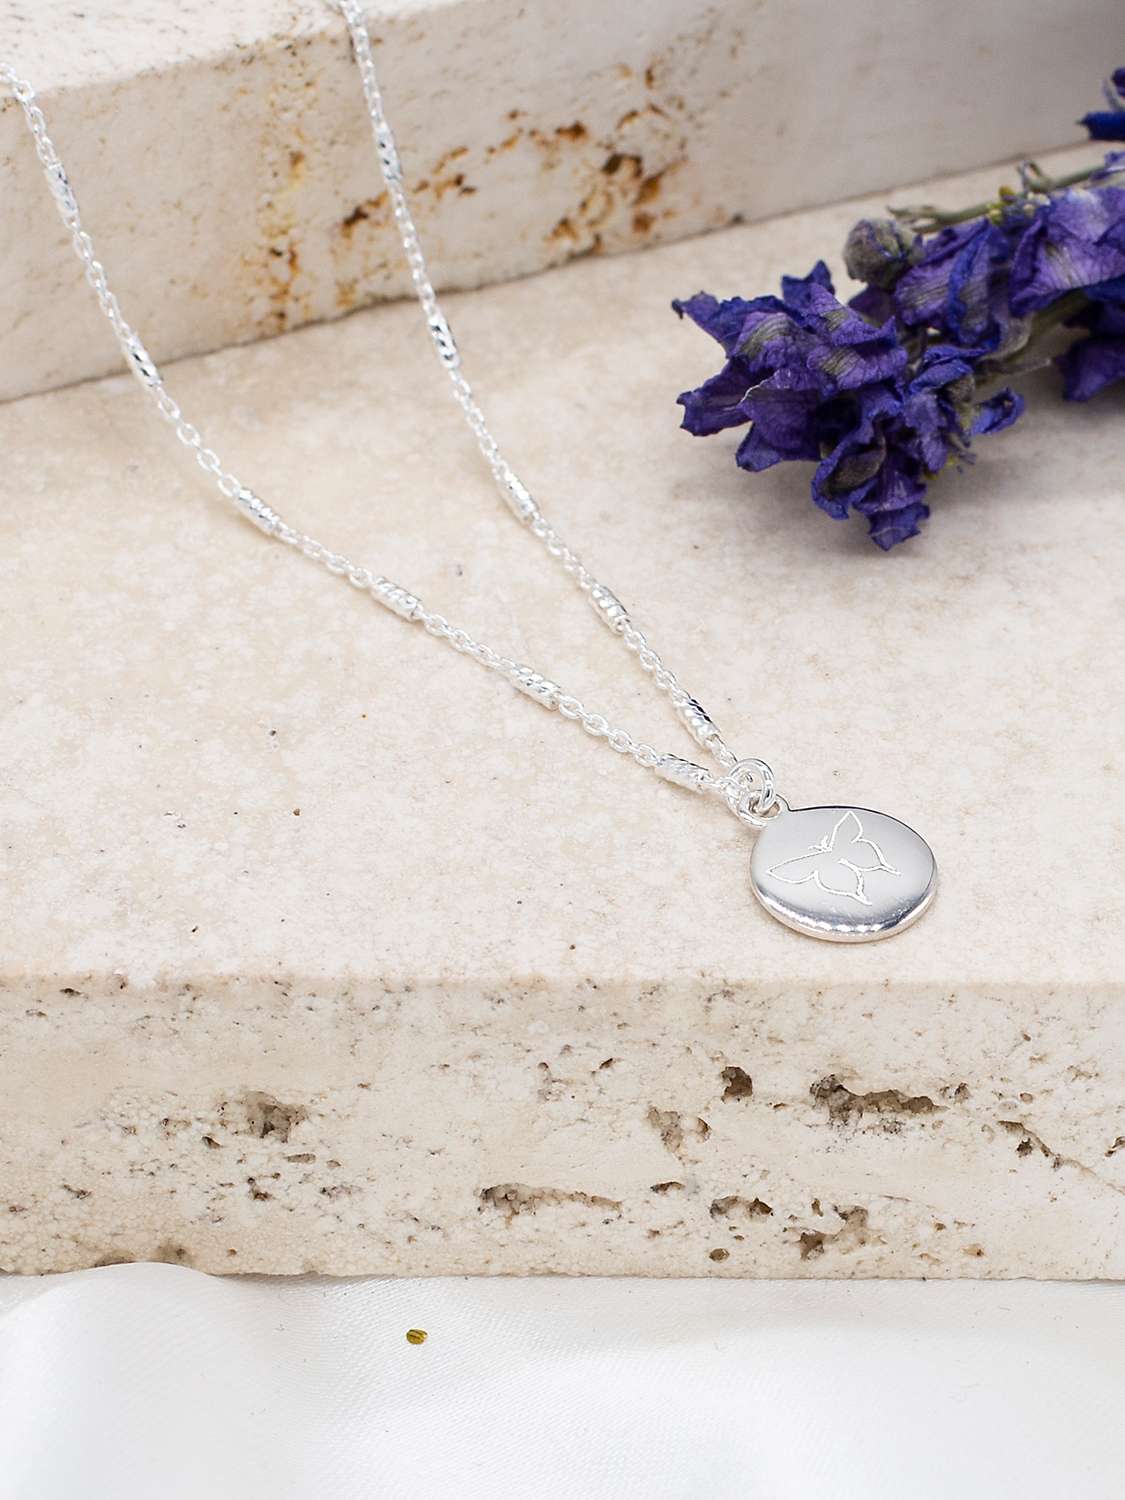 Buy IBB Personalised Sterling Silver Disc Bar Chain Pendant Necklace, Silver Online at johnlewis.com